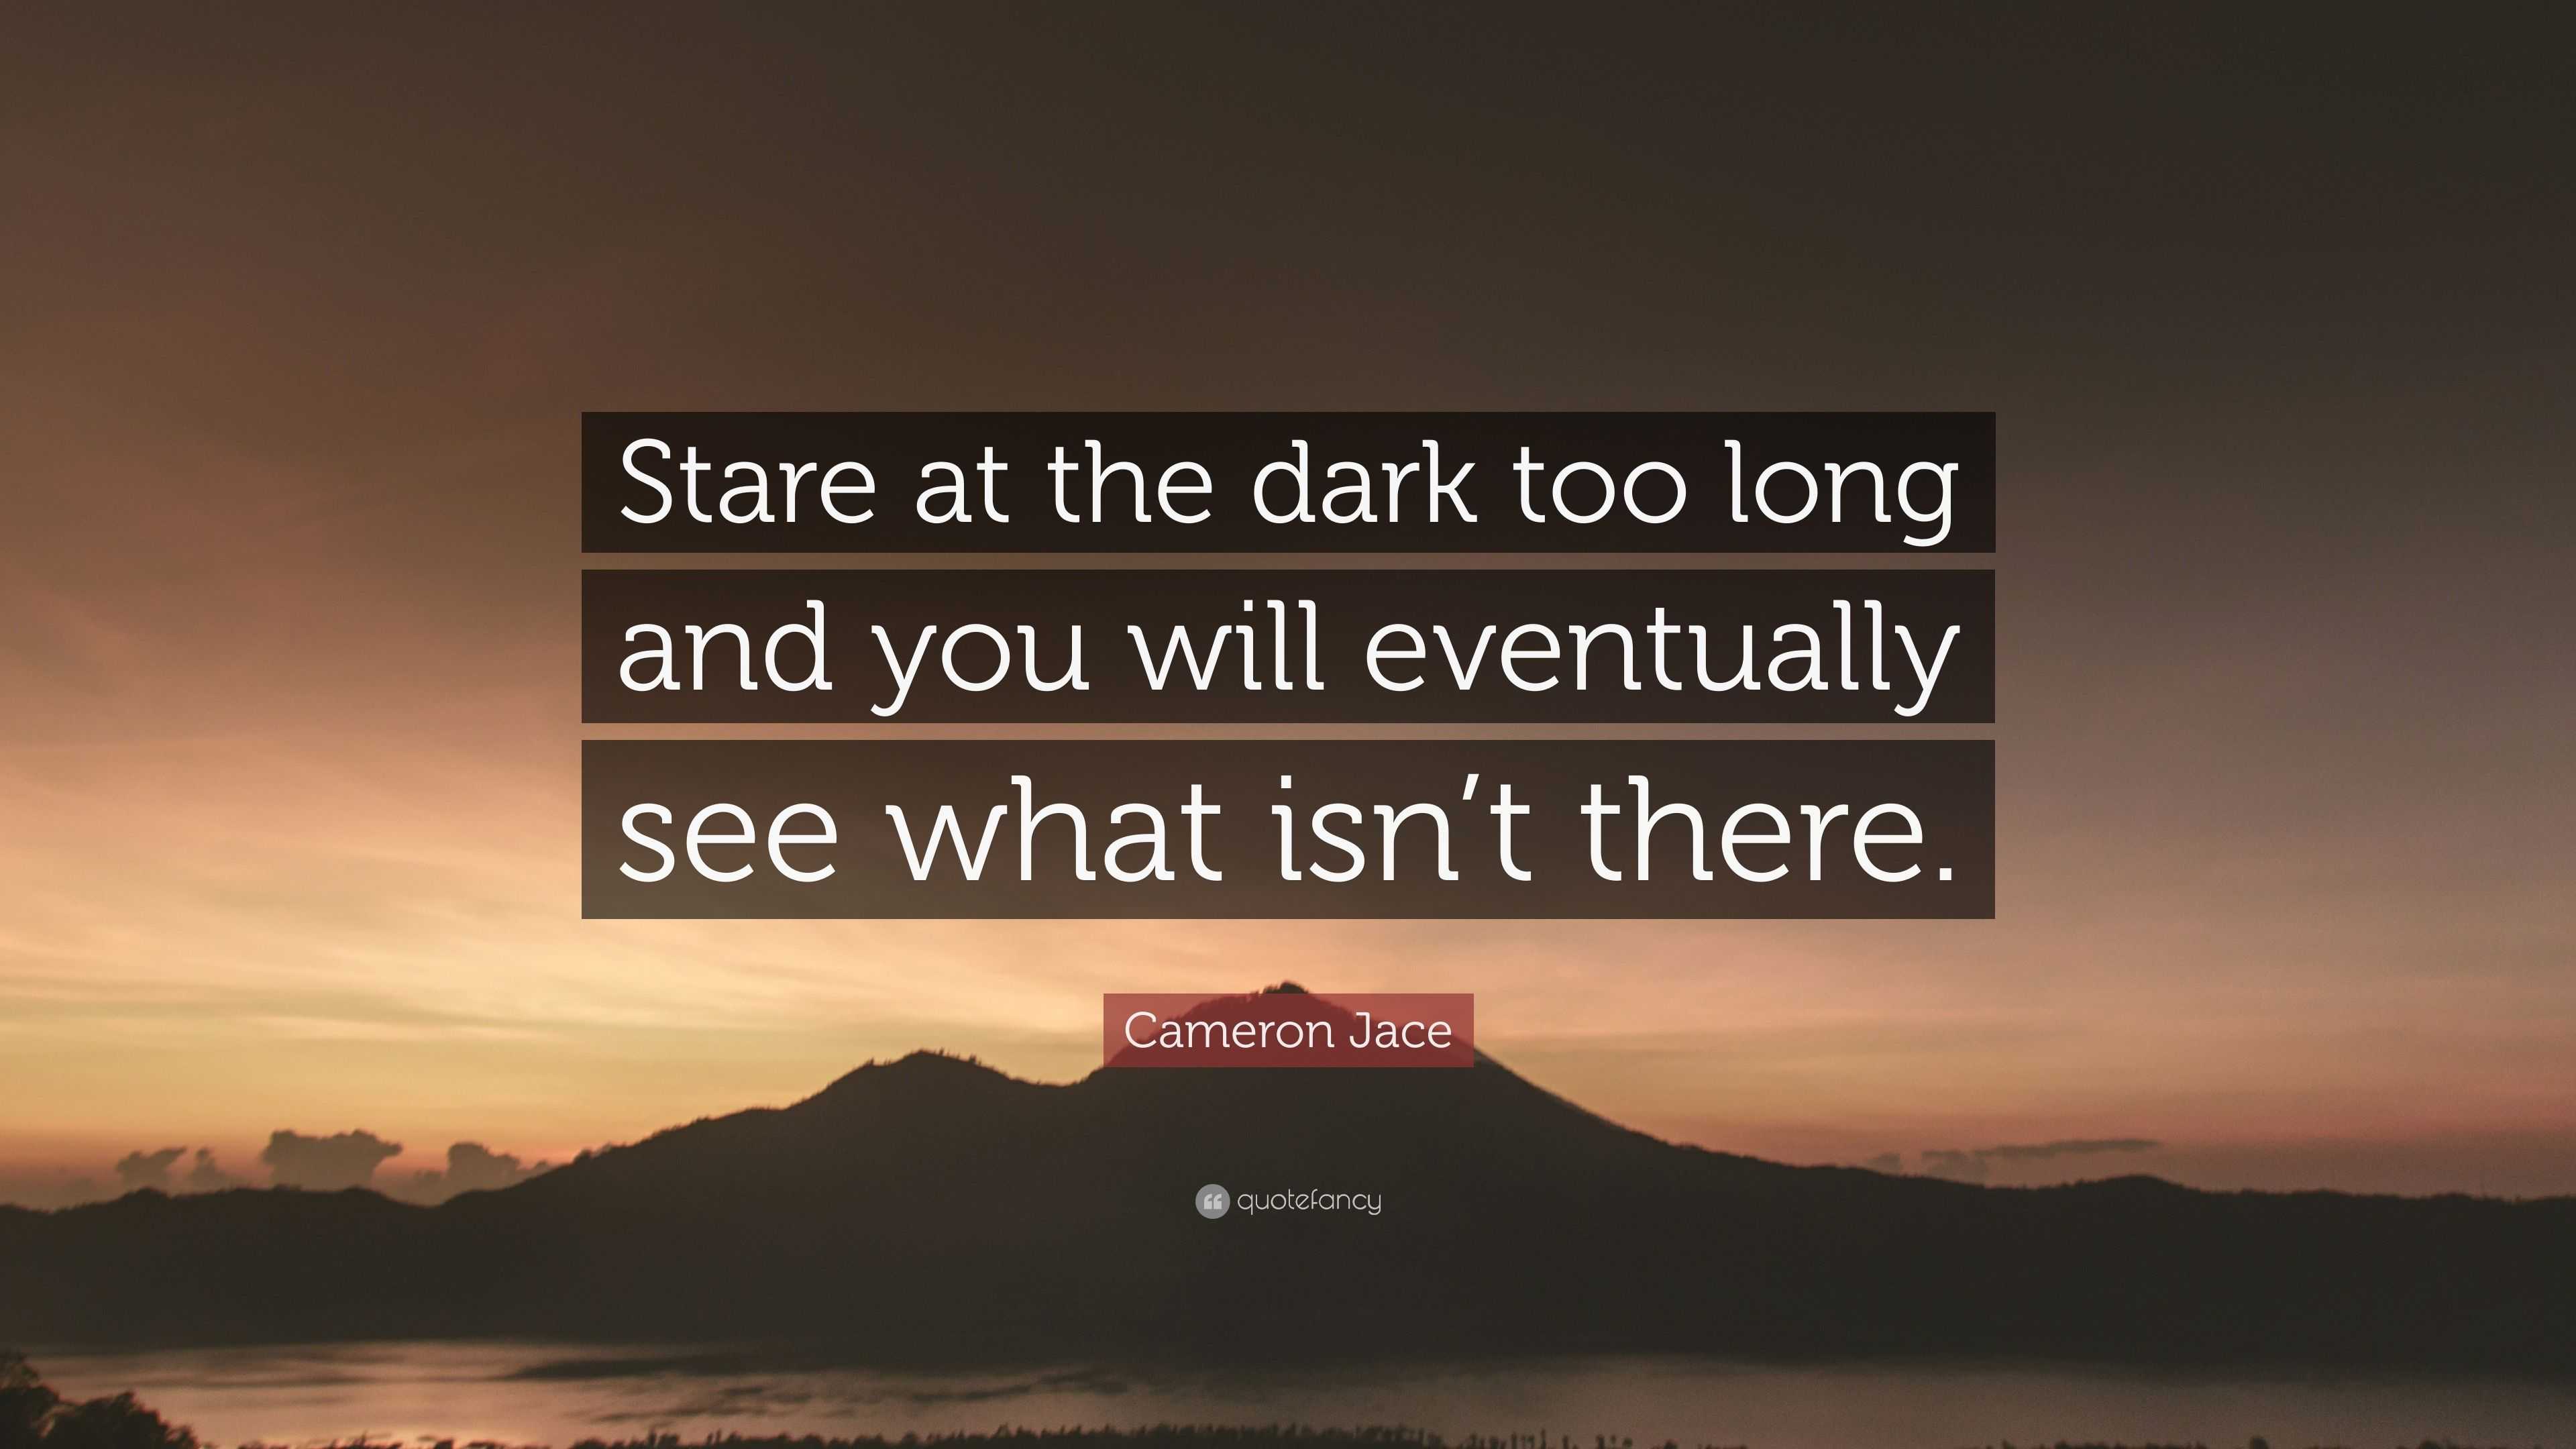 Cameron Jace Quote: "Stare at the dark too long and you will eventually see what isn't there."